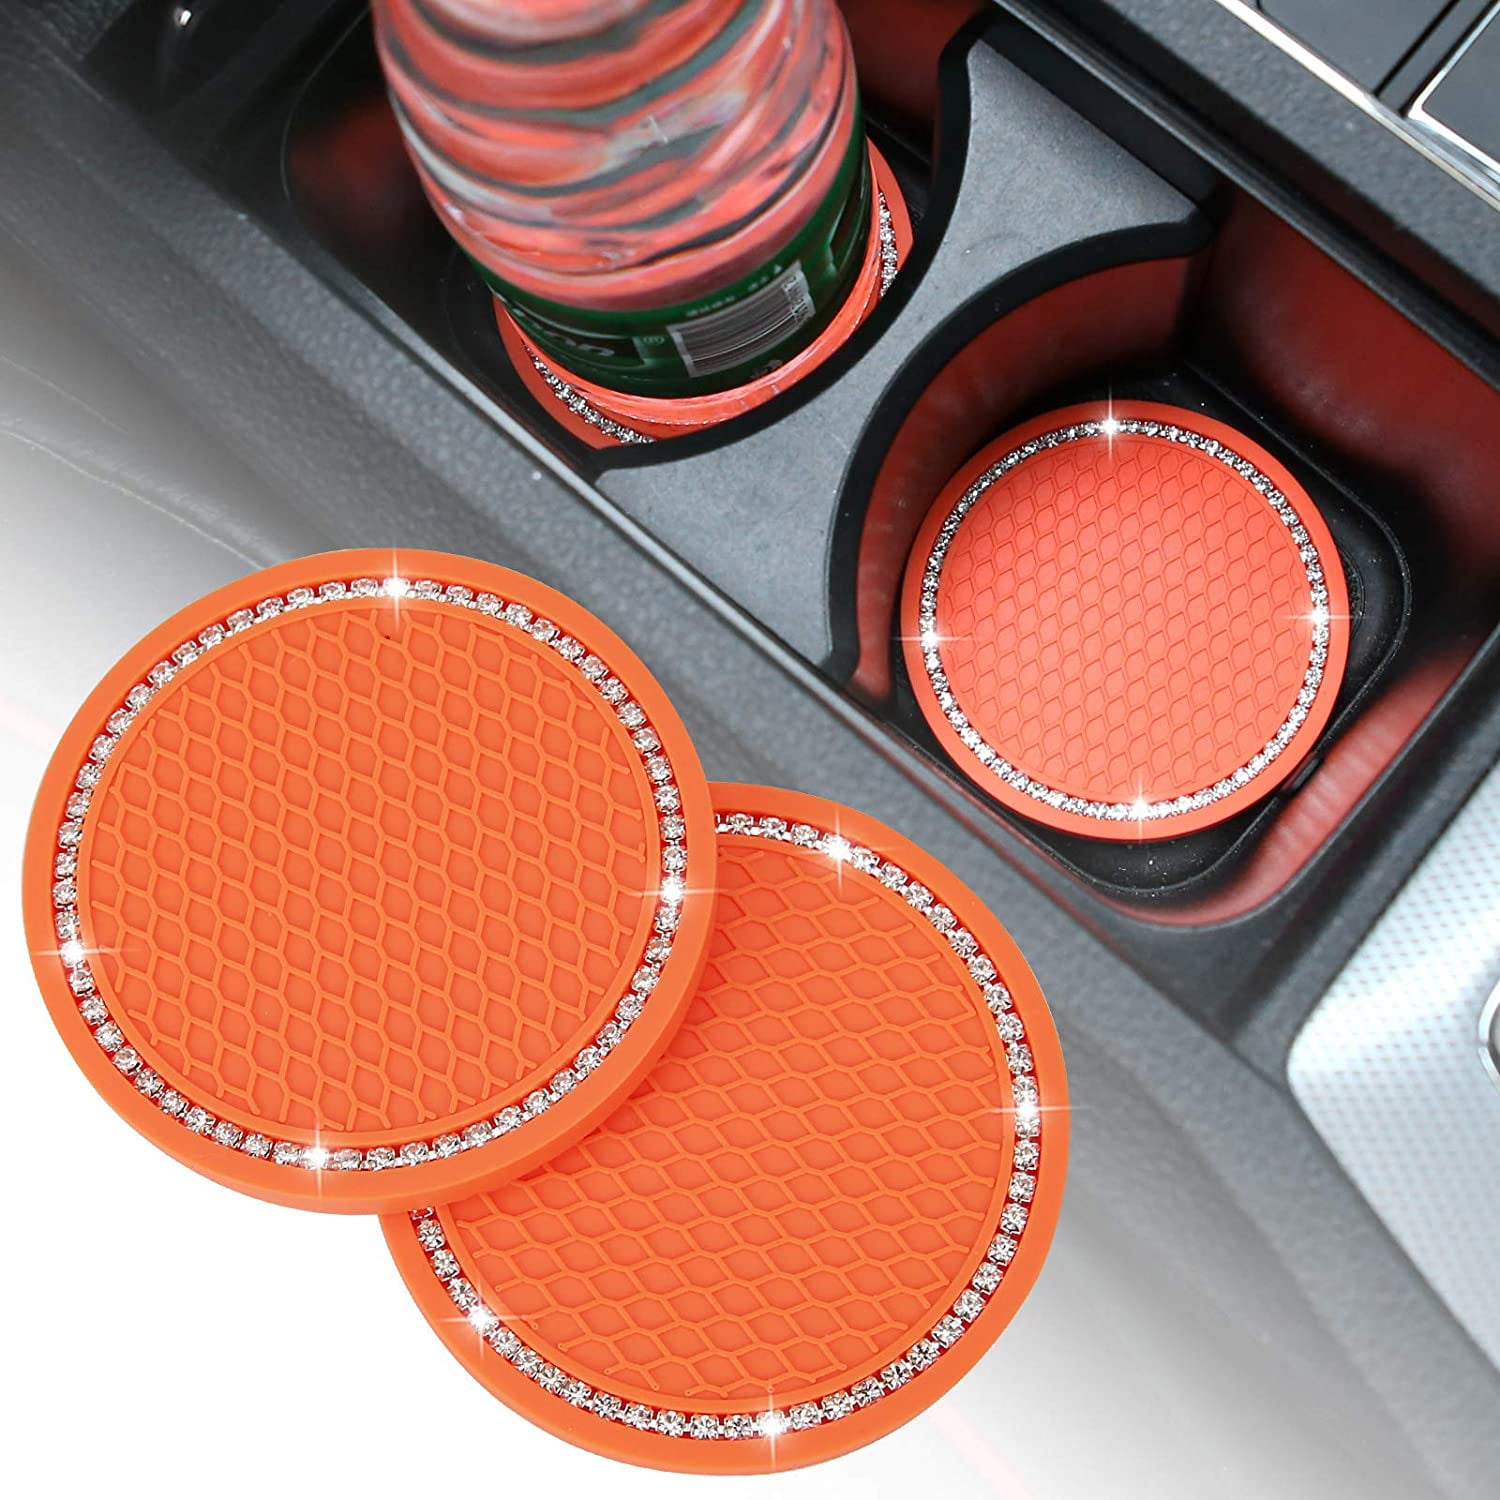 4 Pack Bling Car Coaster 2.75 Inch Bling Crystal Rhinestone Soft Rubber Pad Set Round Auto Cup Holder Insert Drink Coaster Car Interior Accessories 